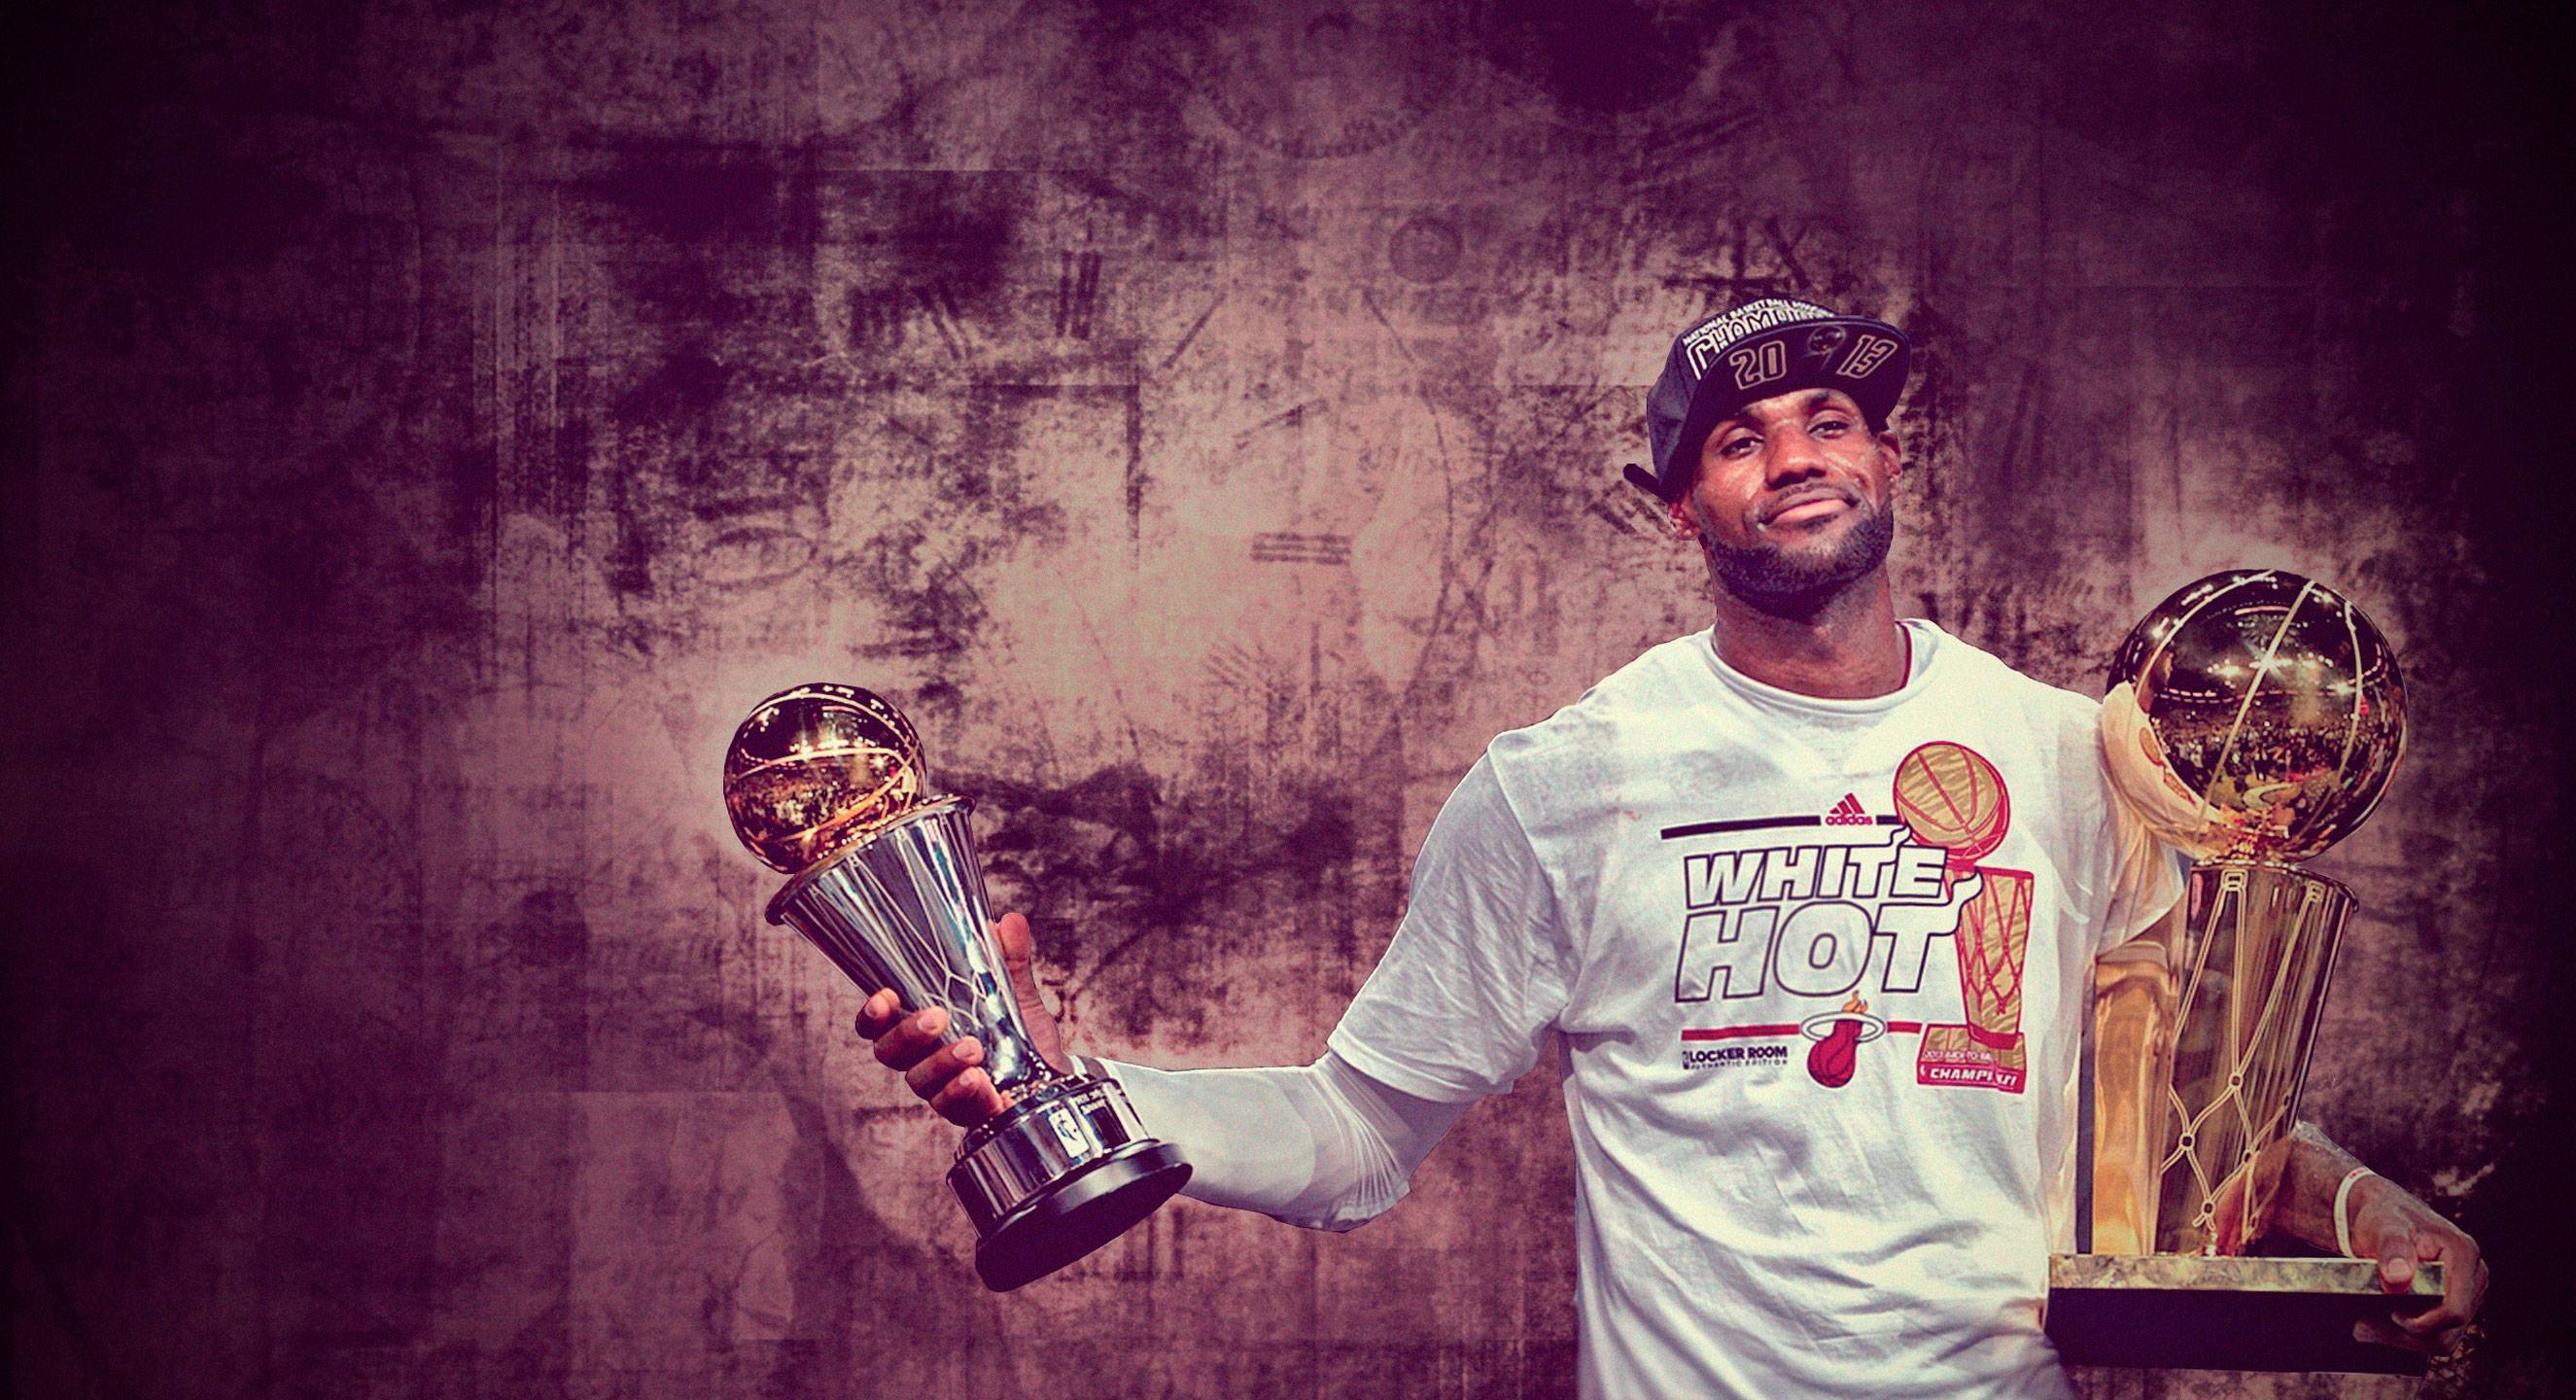 Lebron James and Championship Trophy, iPhone Wallpaper, Facebook